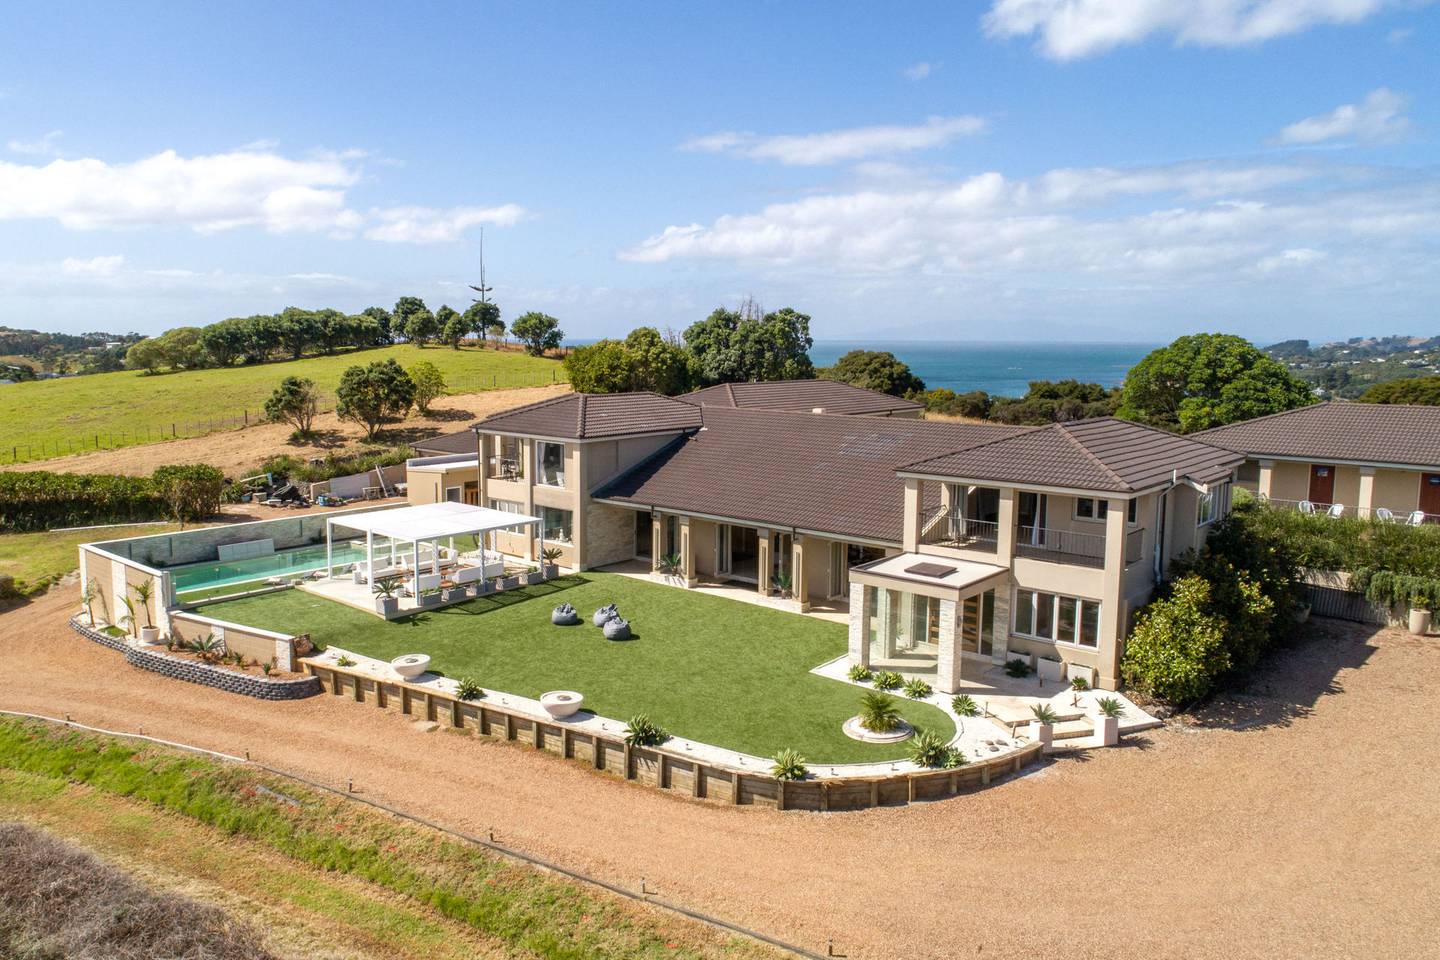 The Waiheke Island home on Church Bay Rd that recently sold for $9m but is quoted on the show as being worth $20m. Photo / Supplied